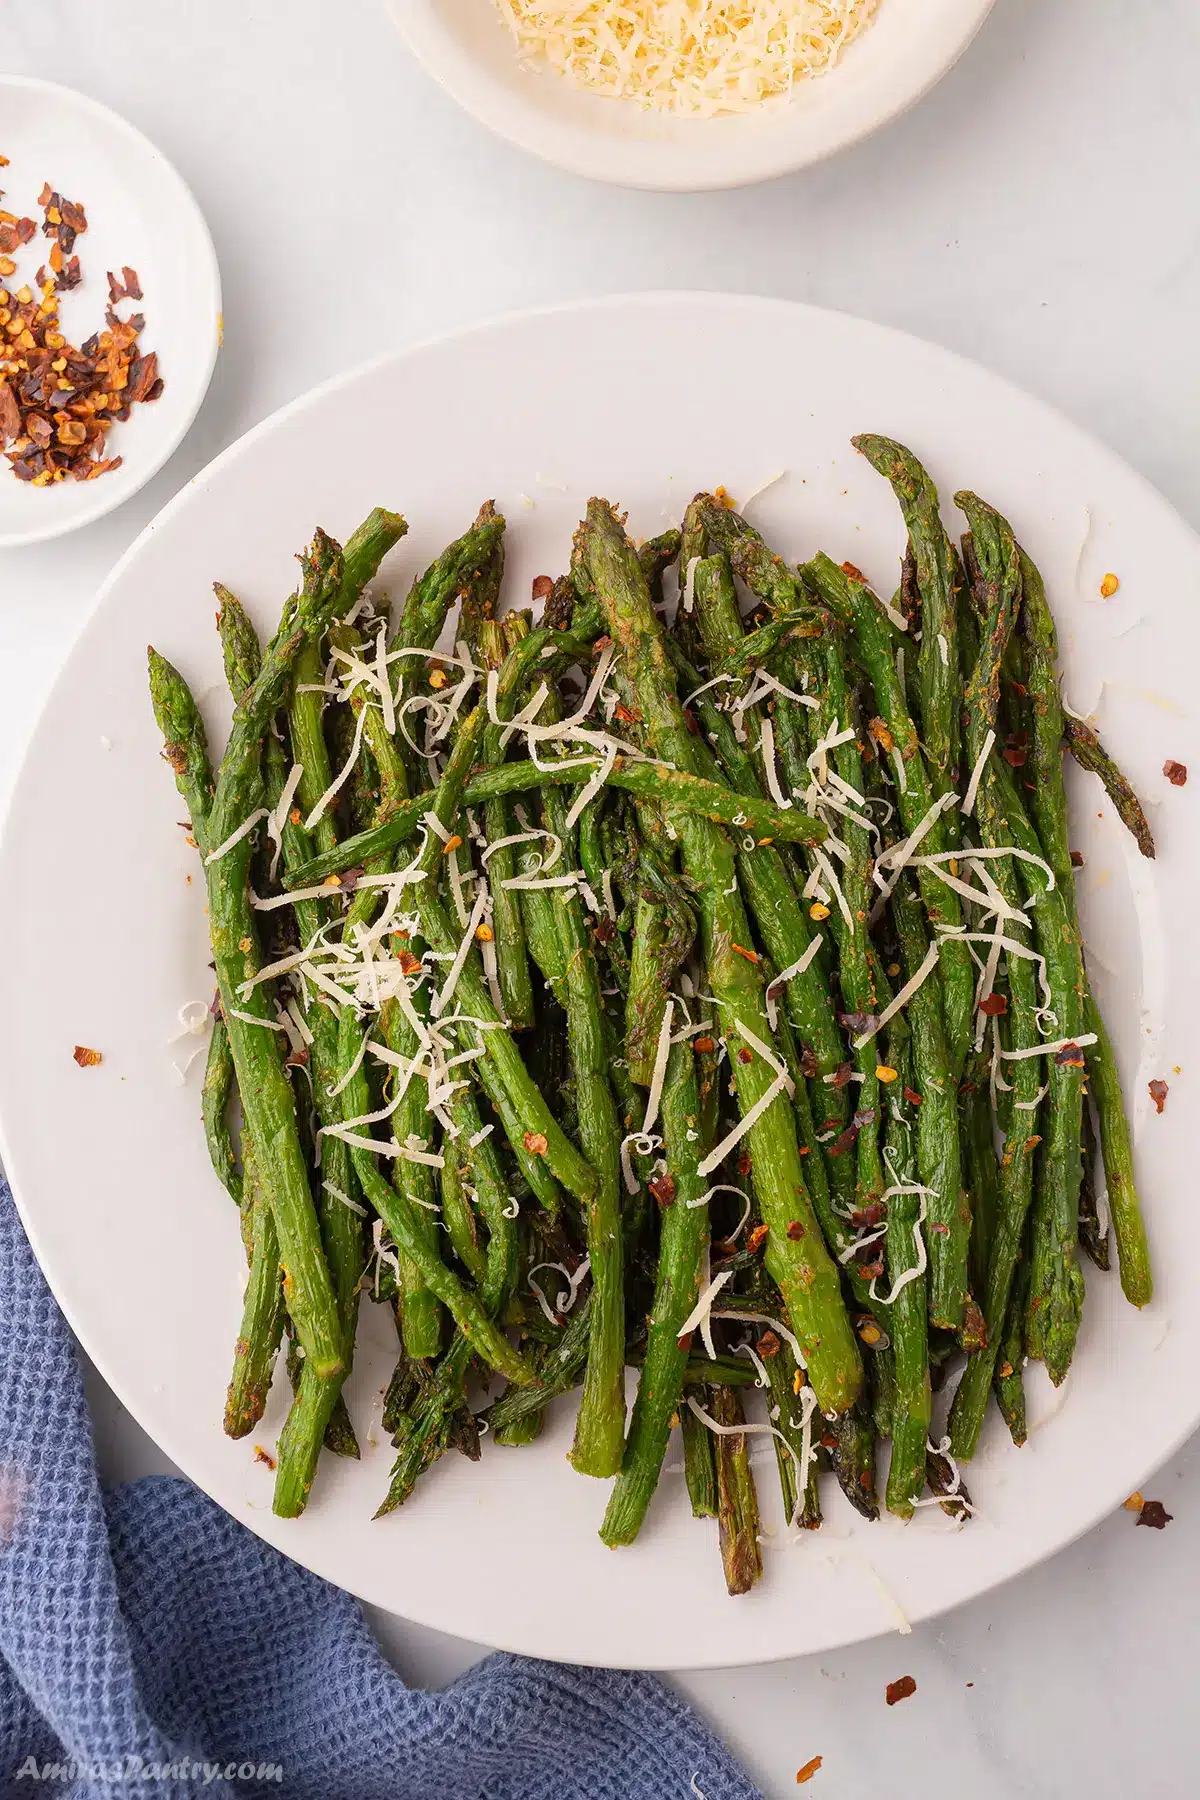 Cooked asparagus in a white plate garnished with parmesan cheese.